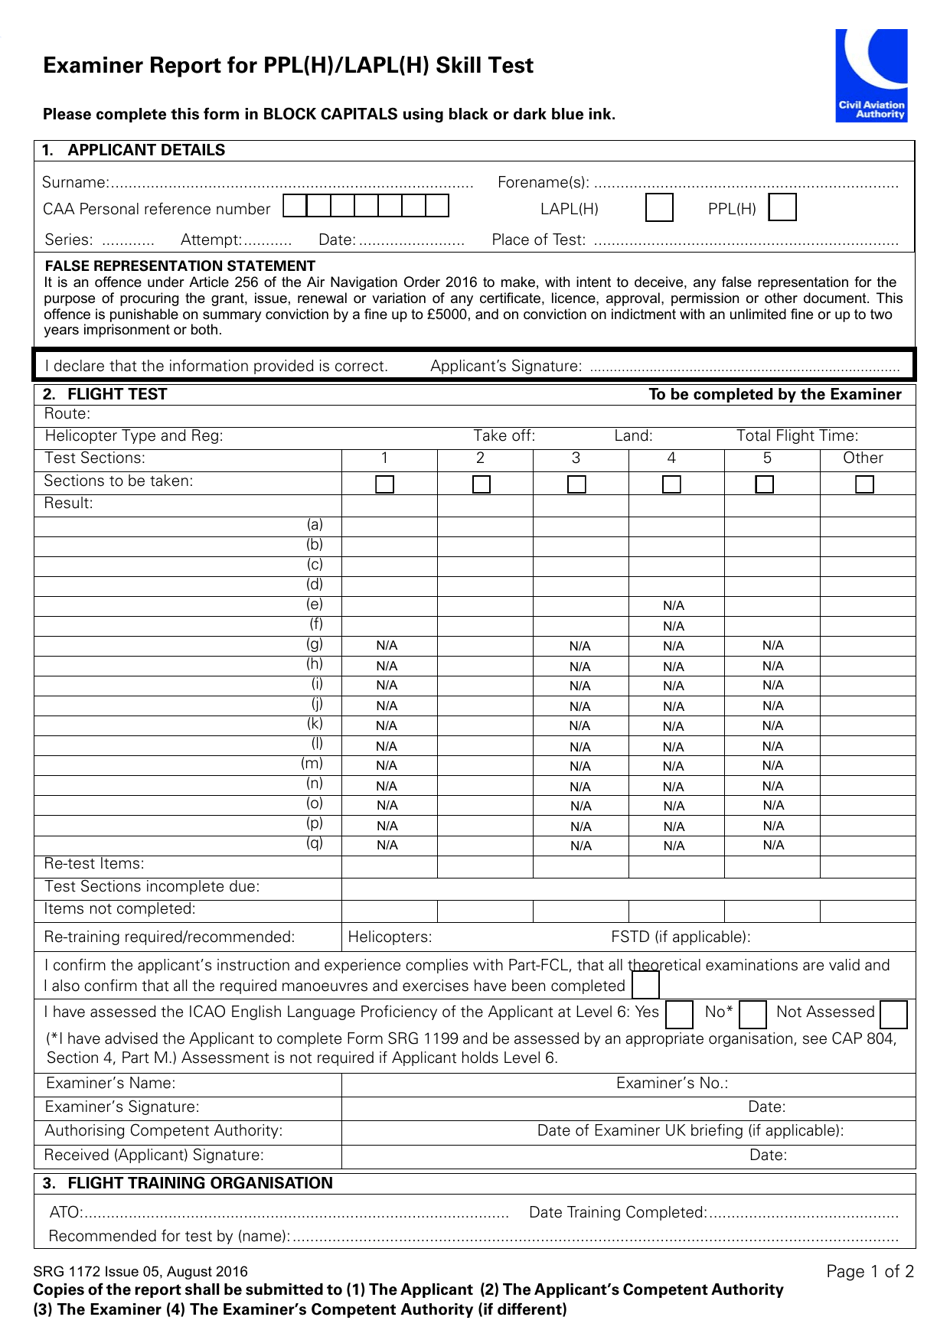 Form SRG1172 Examiner Report for Ppl(H) / Lapl(H) Skill Test - United Kingdom, Page 1